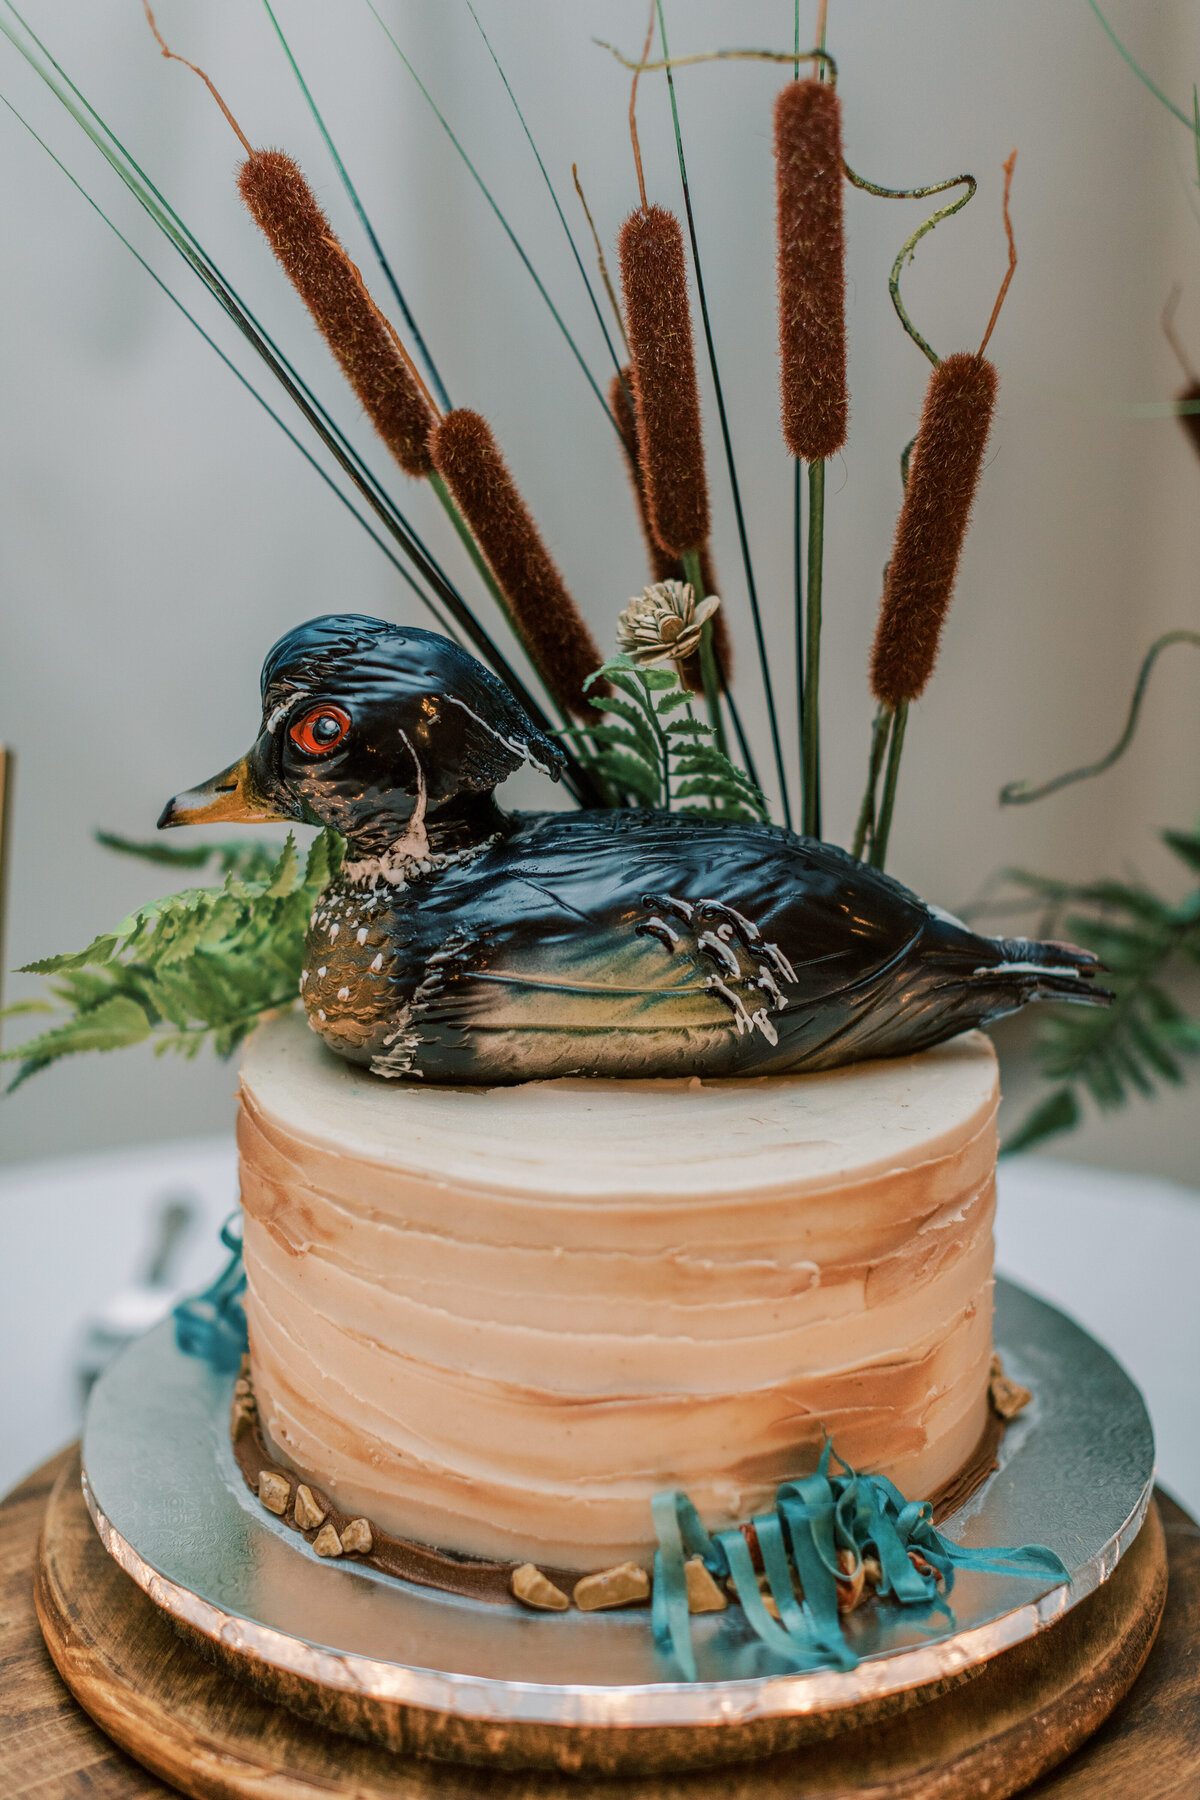 A duck sits on top of the cake.